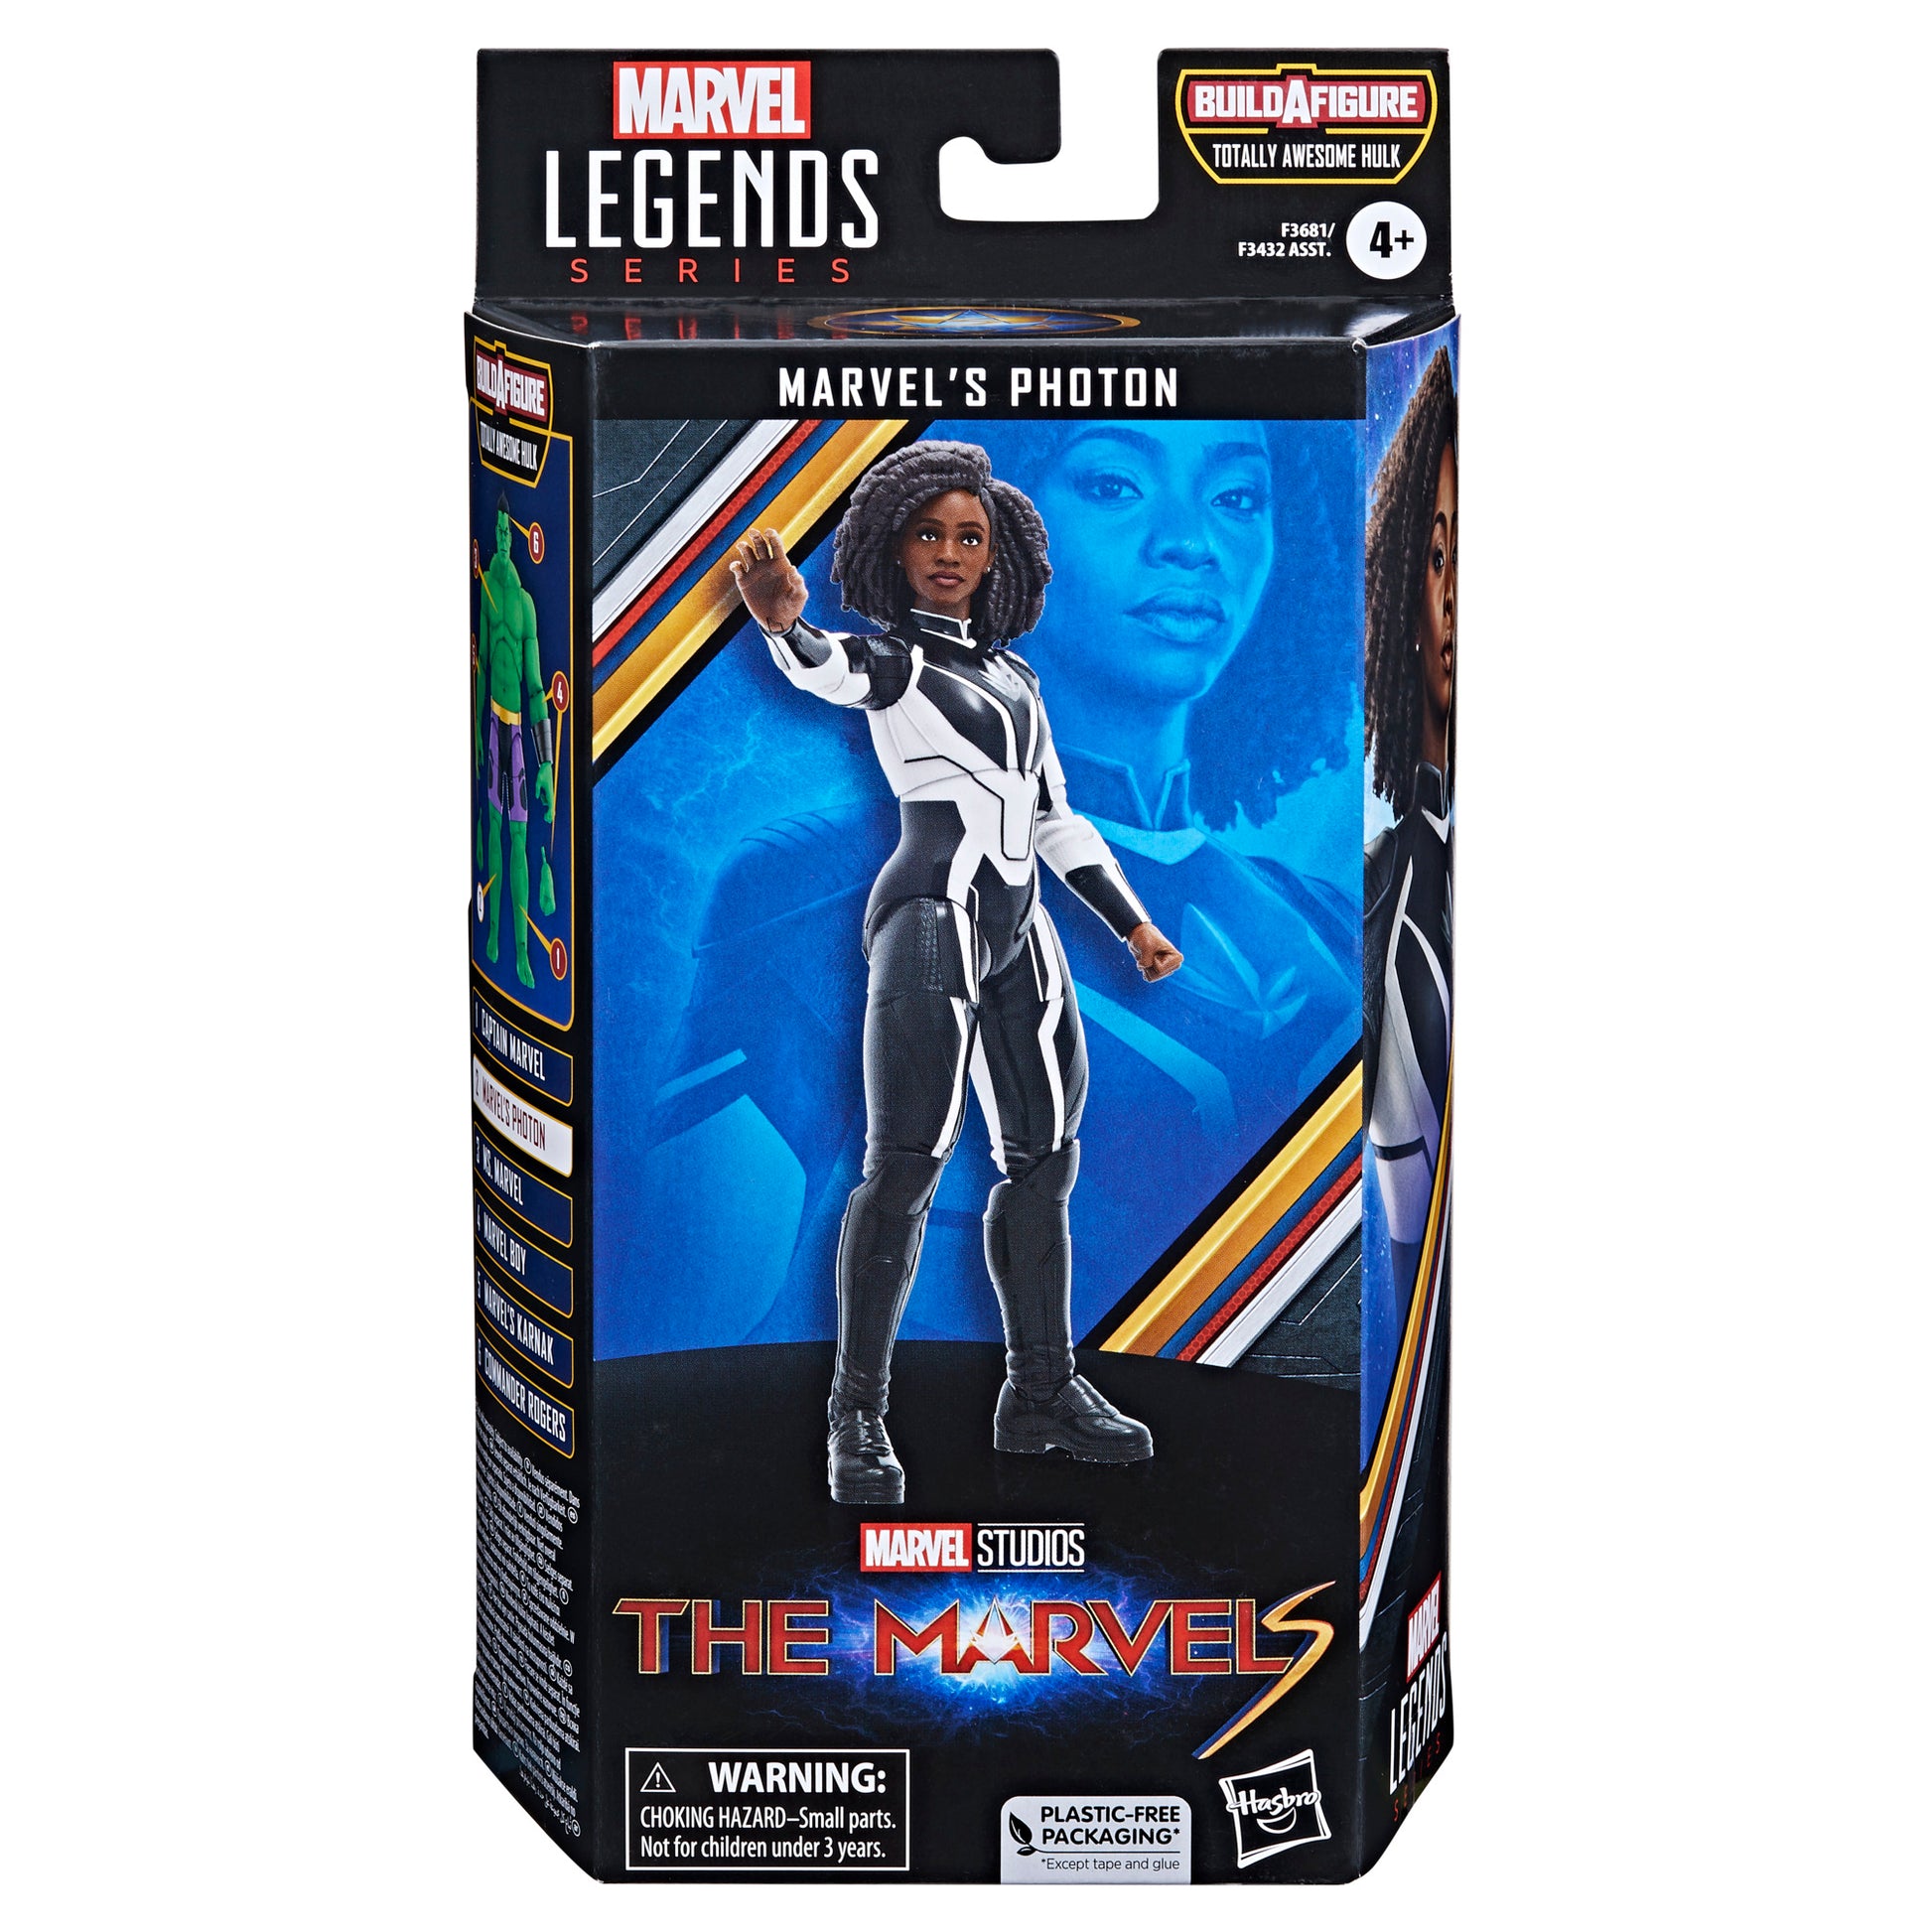 Marvel Legends Series Marvel’s Spectrum Action Figure Toy in a box front view - Heretoserveyou